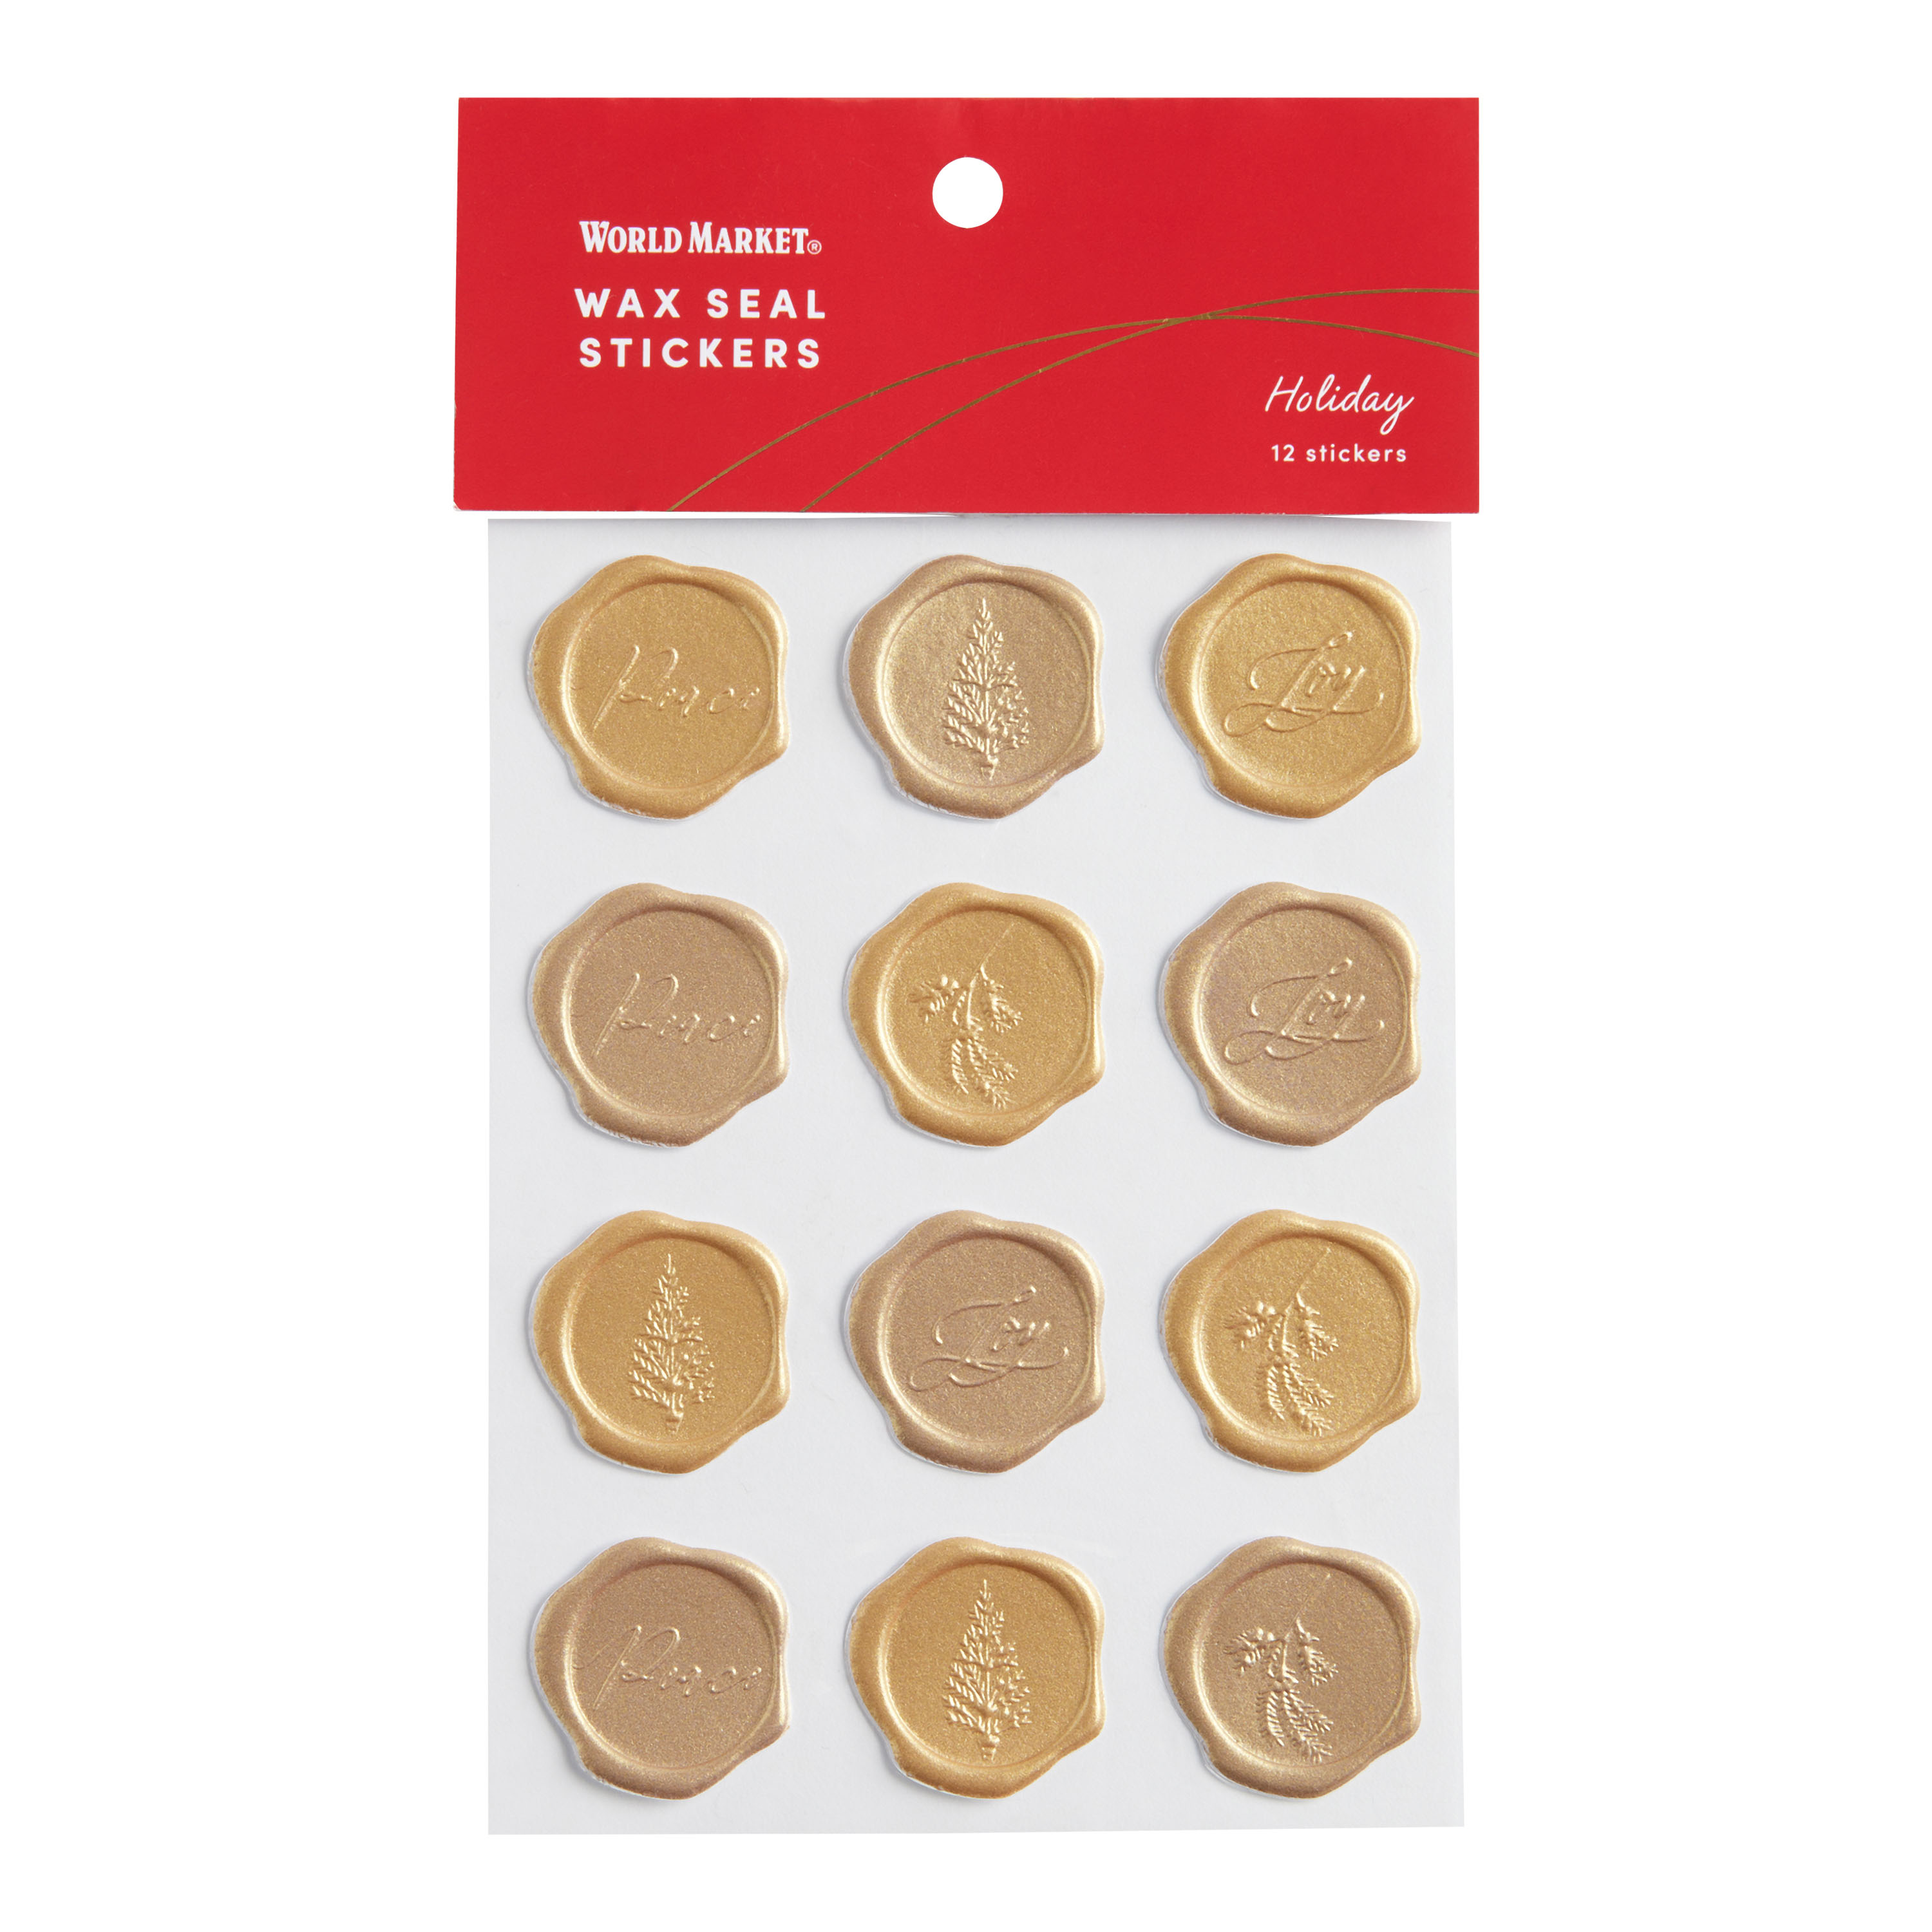 Wax Seal Holiday Adhesive Puffy Stickers 12 Count - World Market